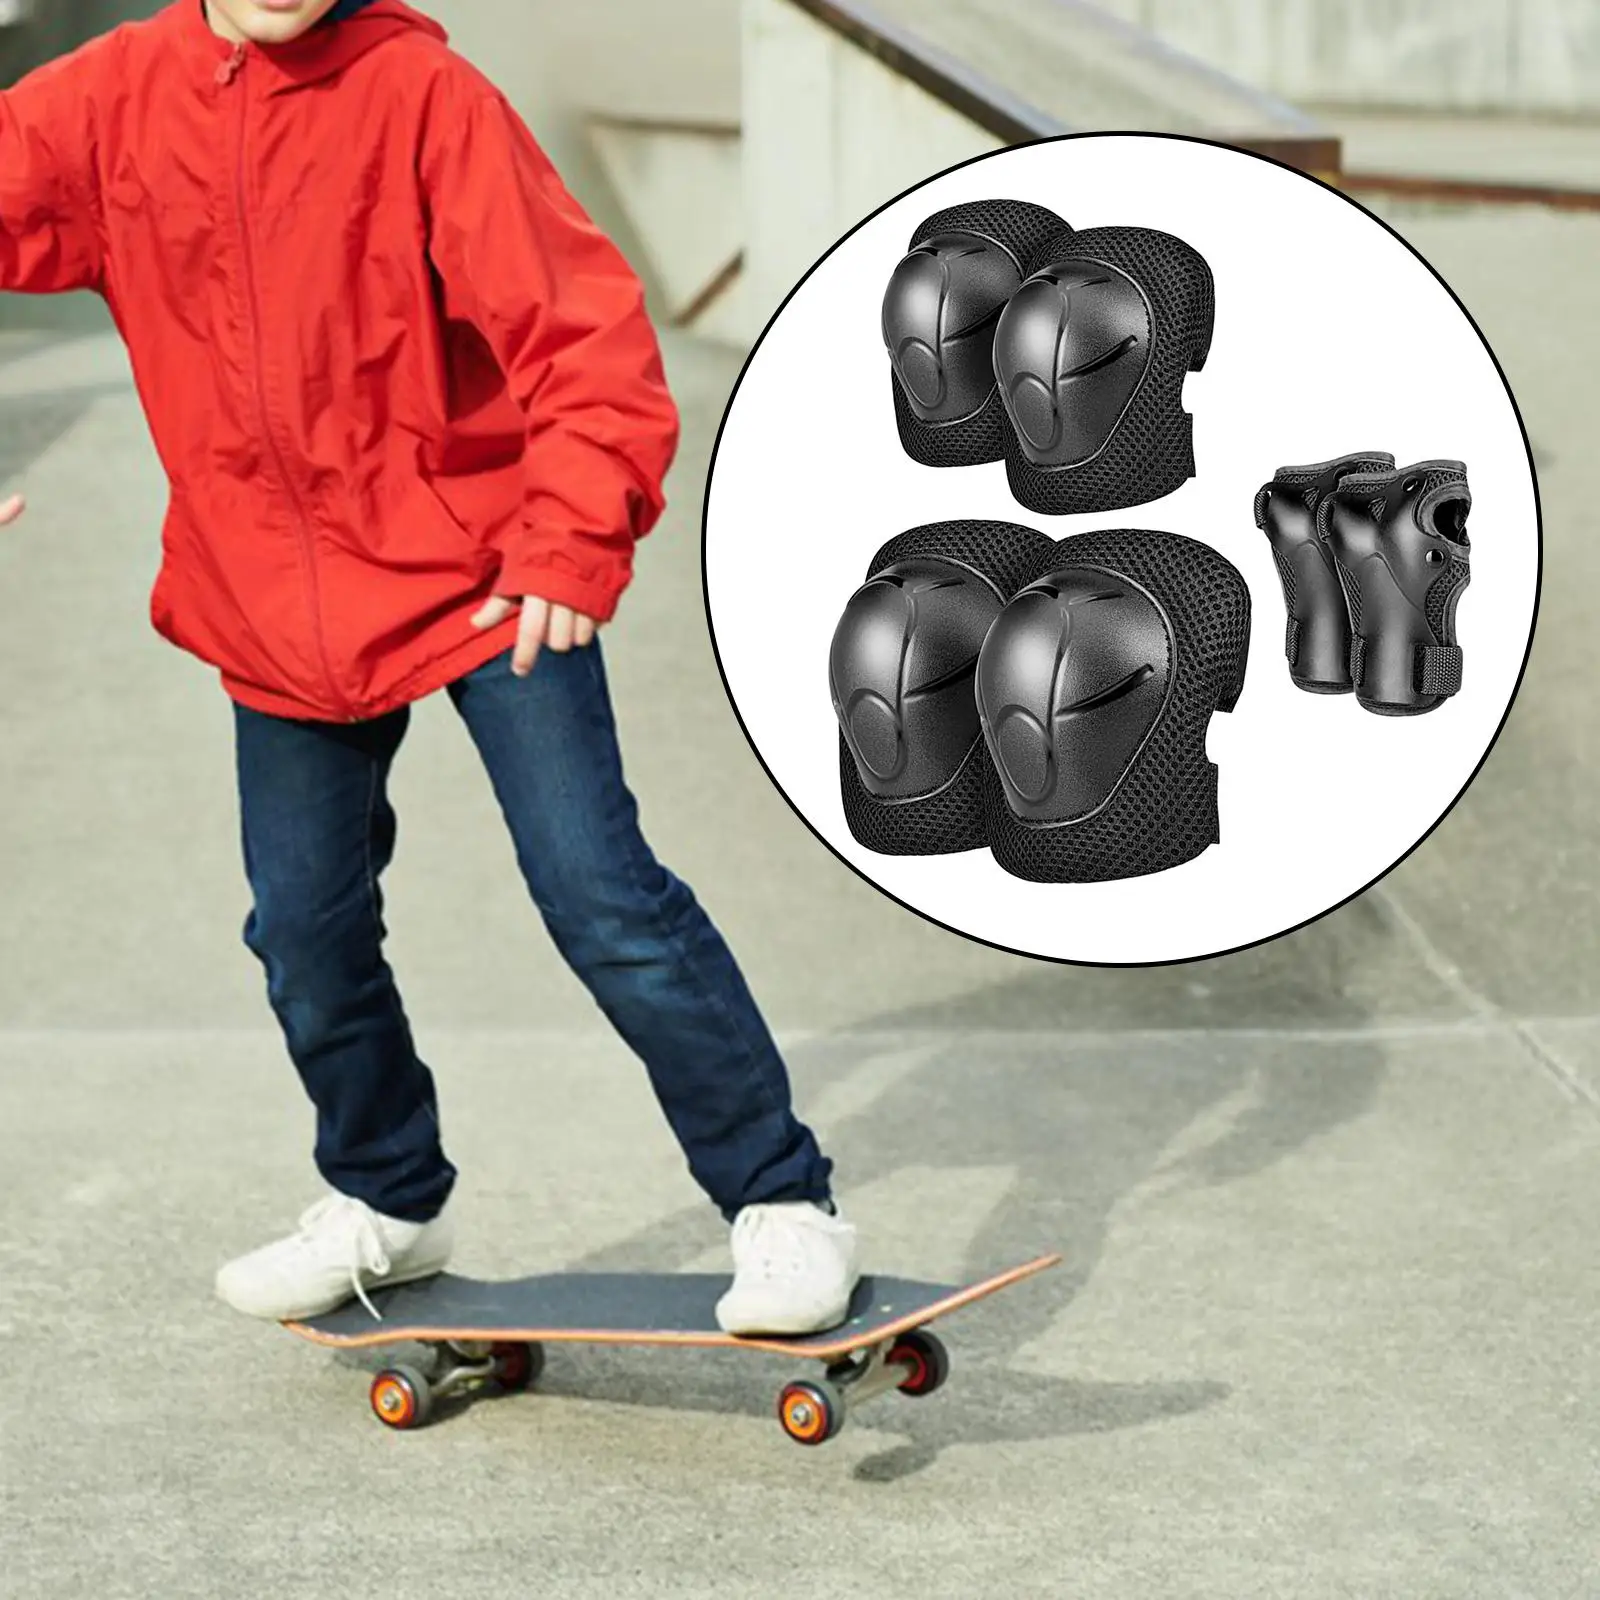 Protective Child Gear Set Wrist Elbow Knee Pads Safe for Skateboarding Outdoor Activities Rock Climbing Rollerblading Riding